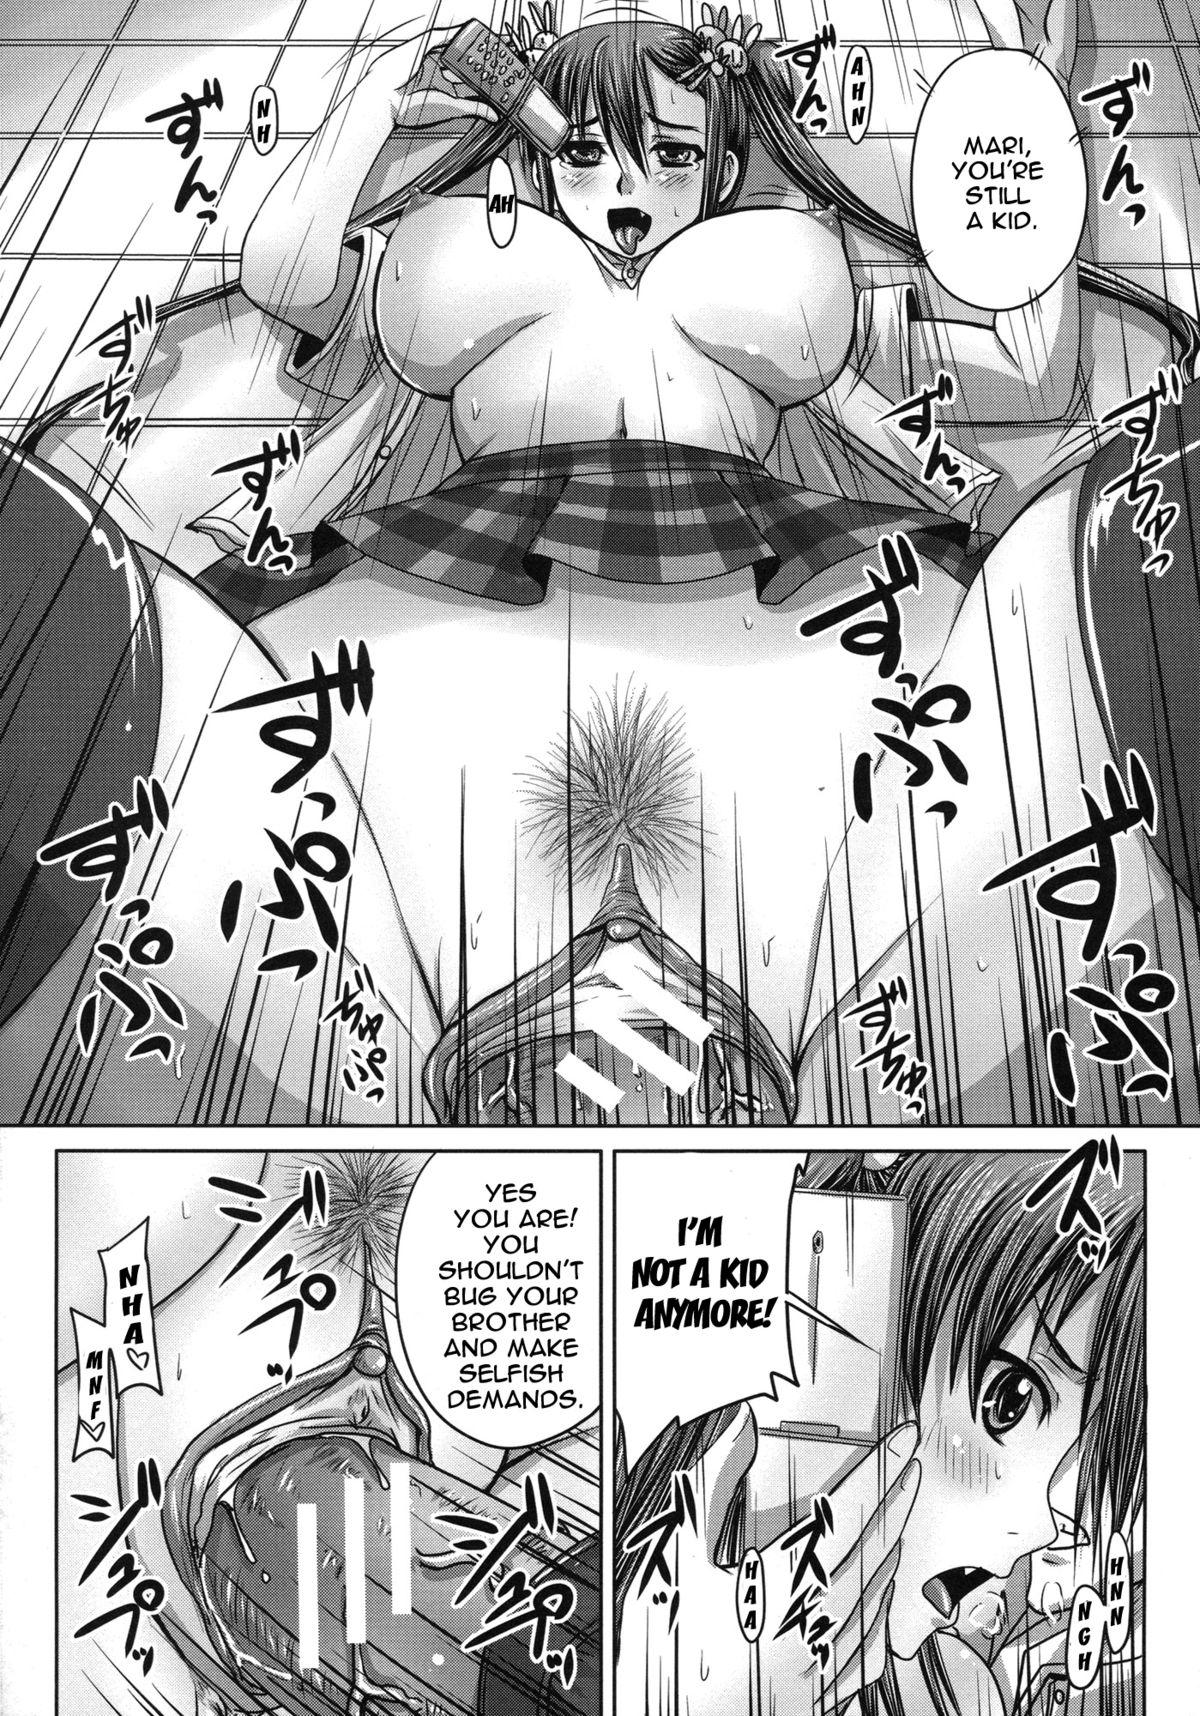 [Akigami Satoru] Tsukurou! Onaho Ane - Let's made a Sex Sleeve from Sister | Turning My Elder-Sister into a Sex-Sleeve [English] {doujin-moe.us} 116